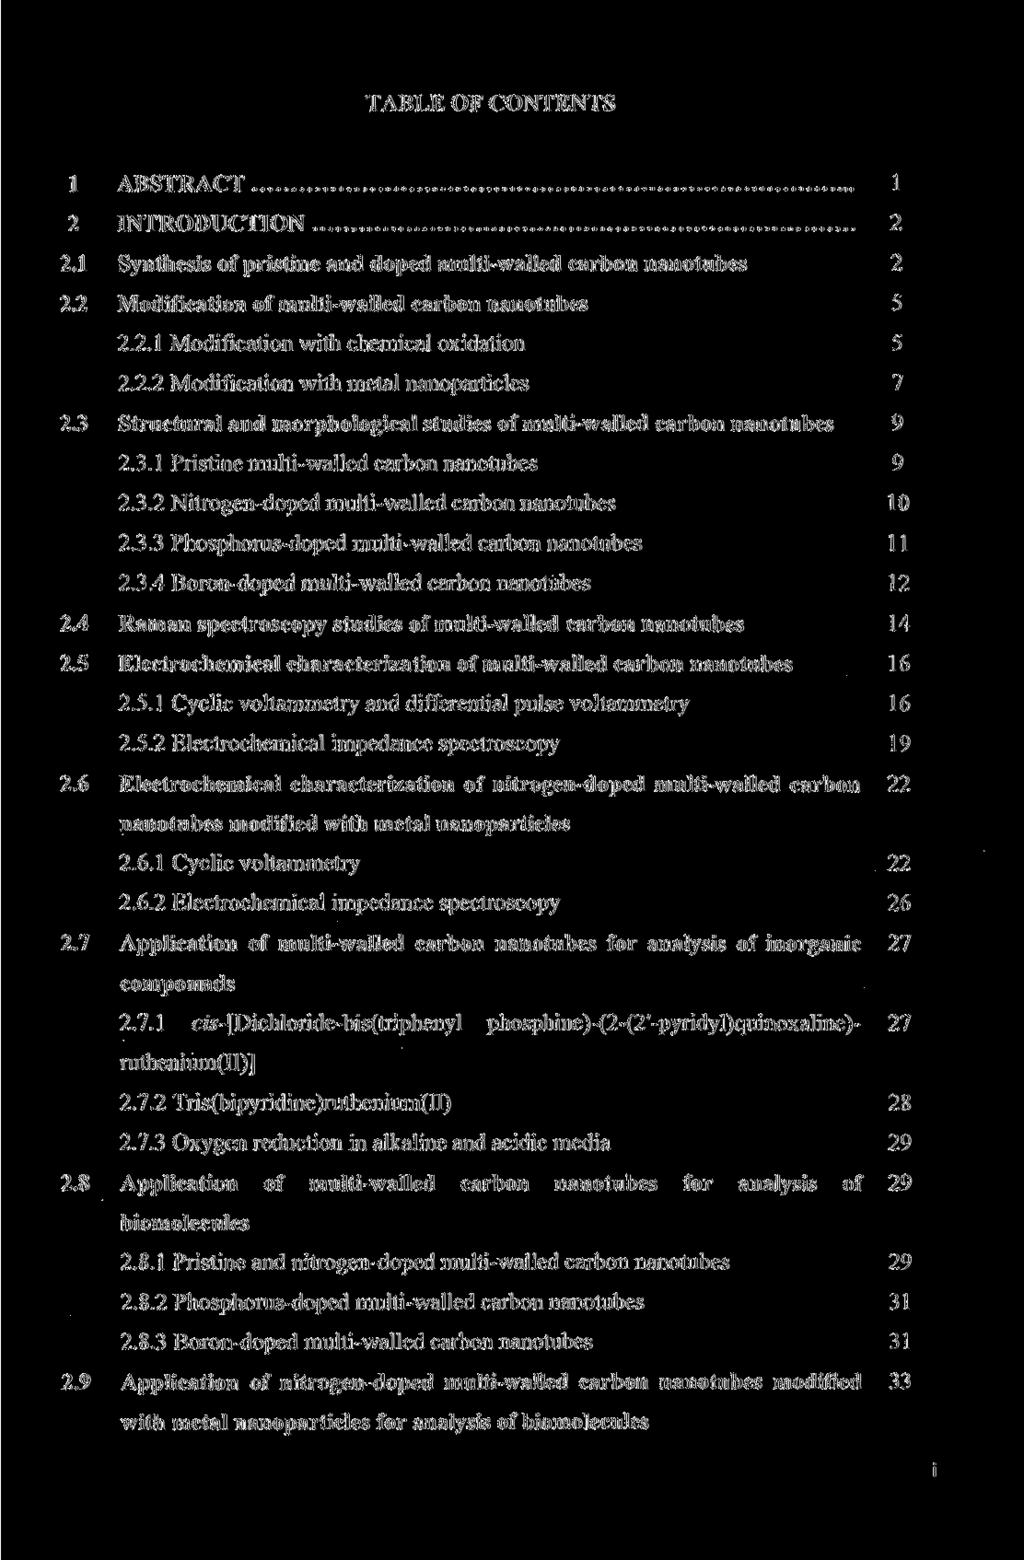 TABLE OF CONTENTS 1 ABSTRACT 1 2 INTRODUCTION 2 2.1 Synthesis of pristine and doped multi-walled carbon nanotubes 2 2.2 Modification of multi-walled carbon nanotubes 5 2.2.1 Modification with chemical oxidation 5 2.